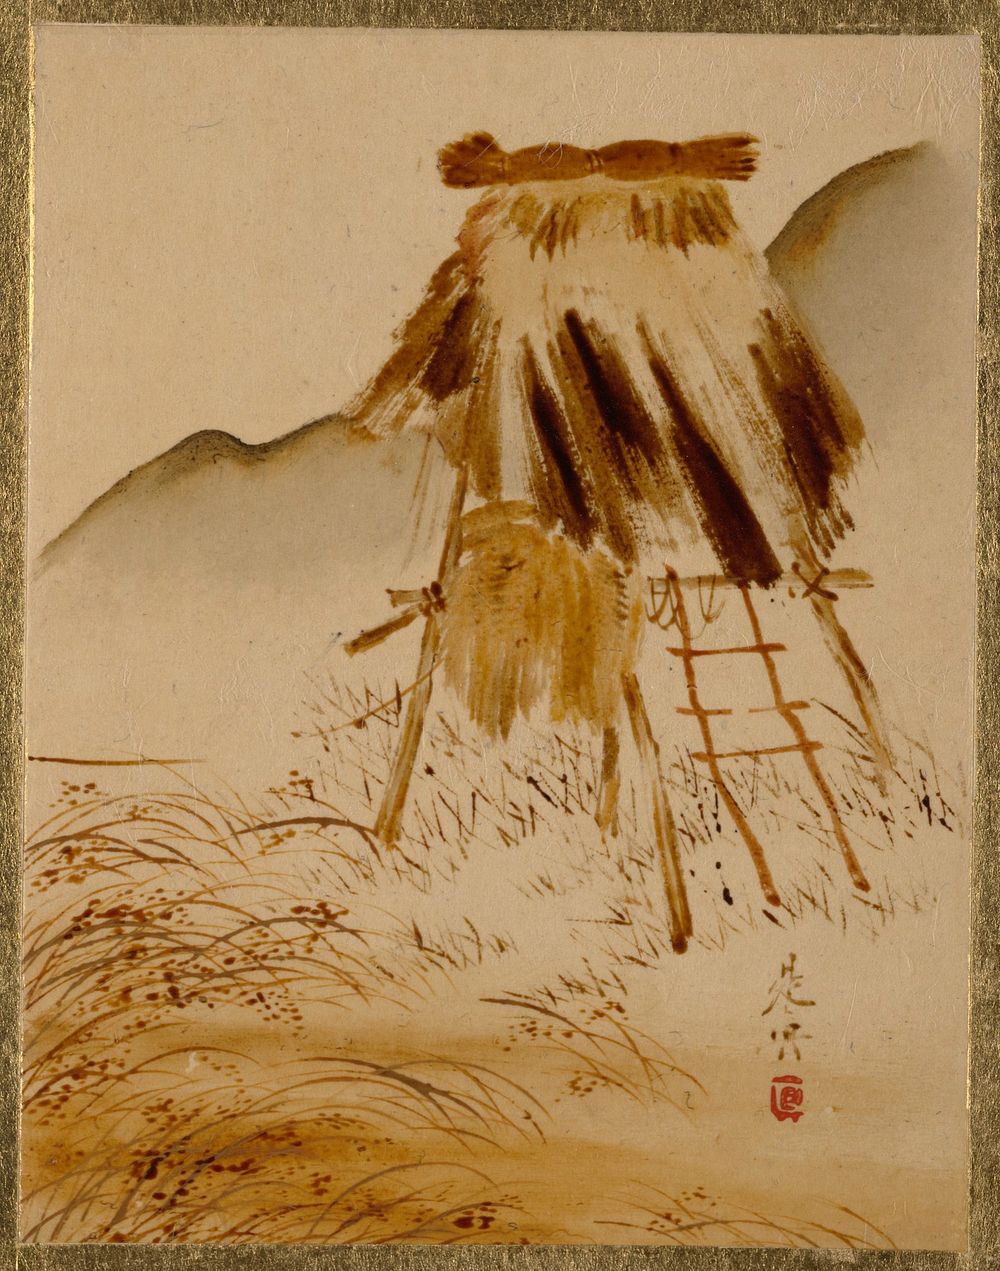 Rice-Drying Frame. Original public domain image from the MET museum.